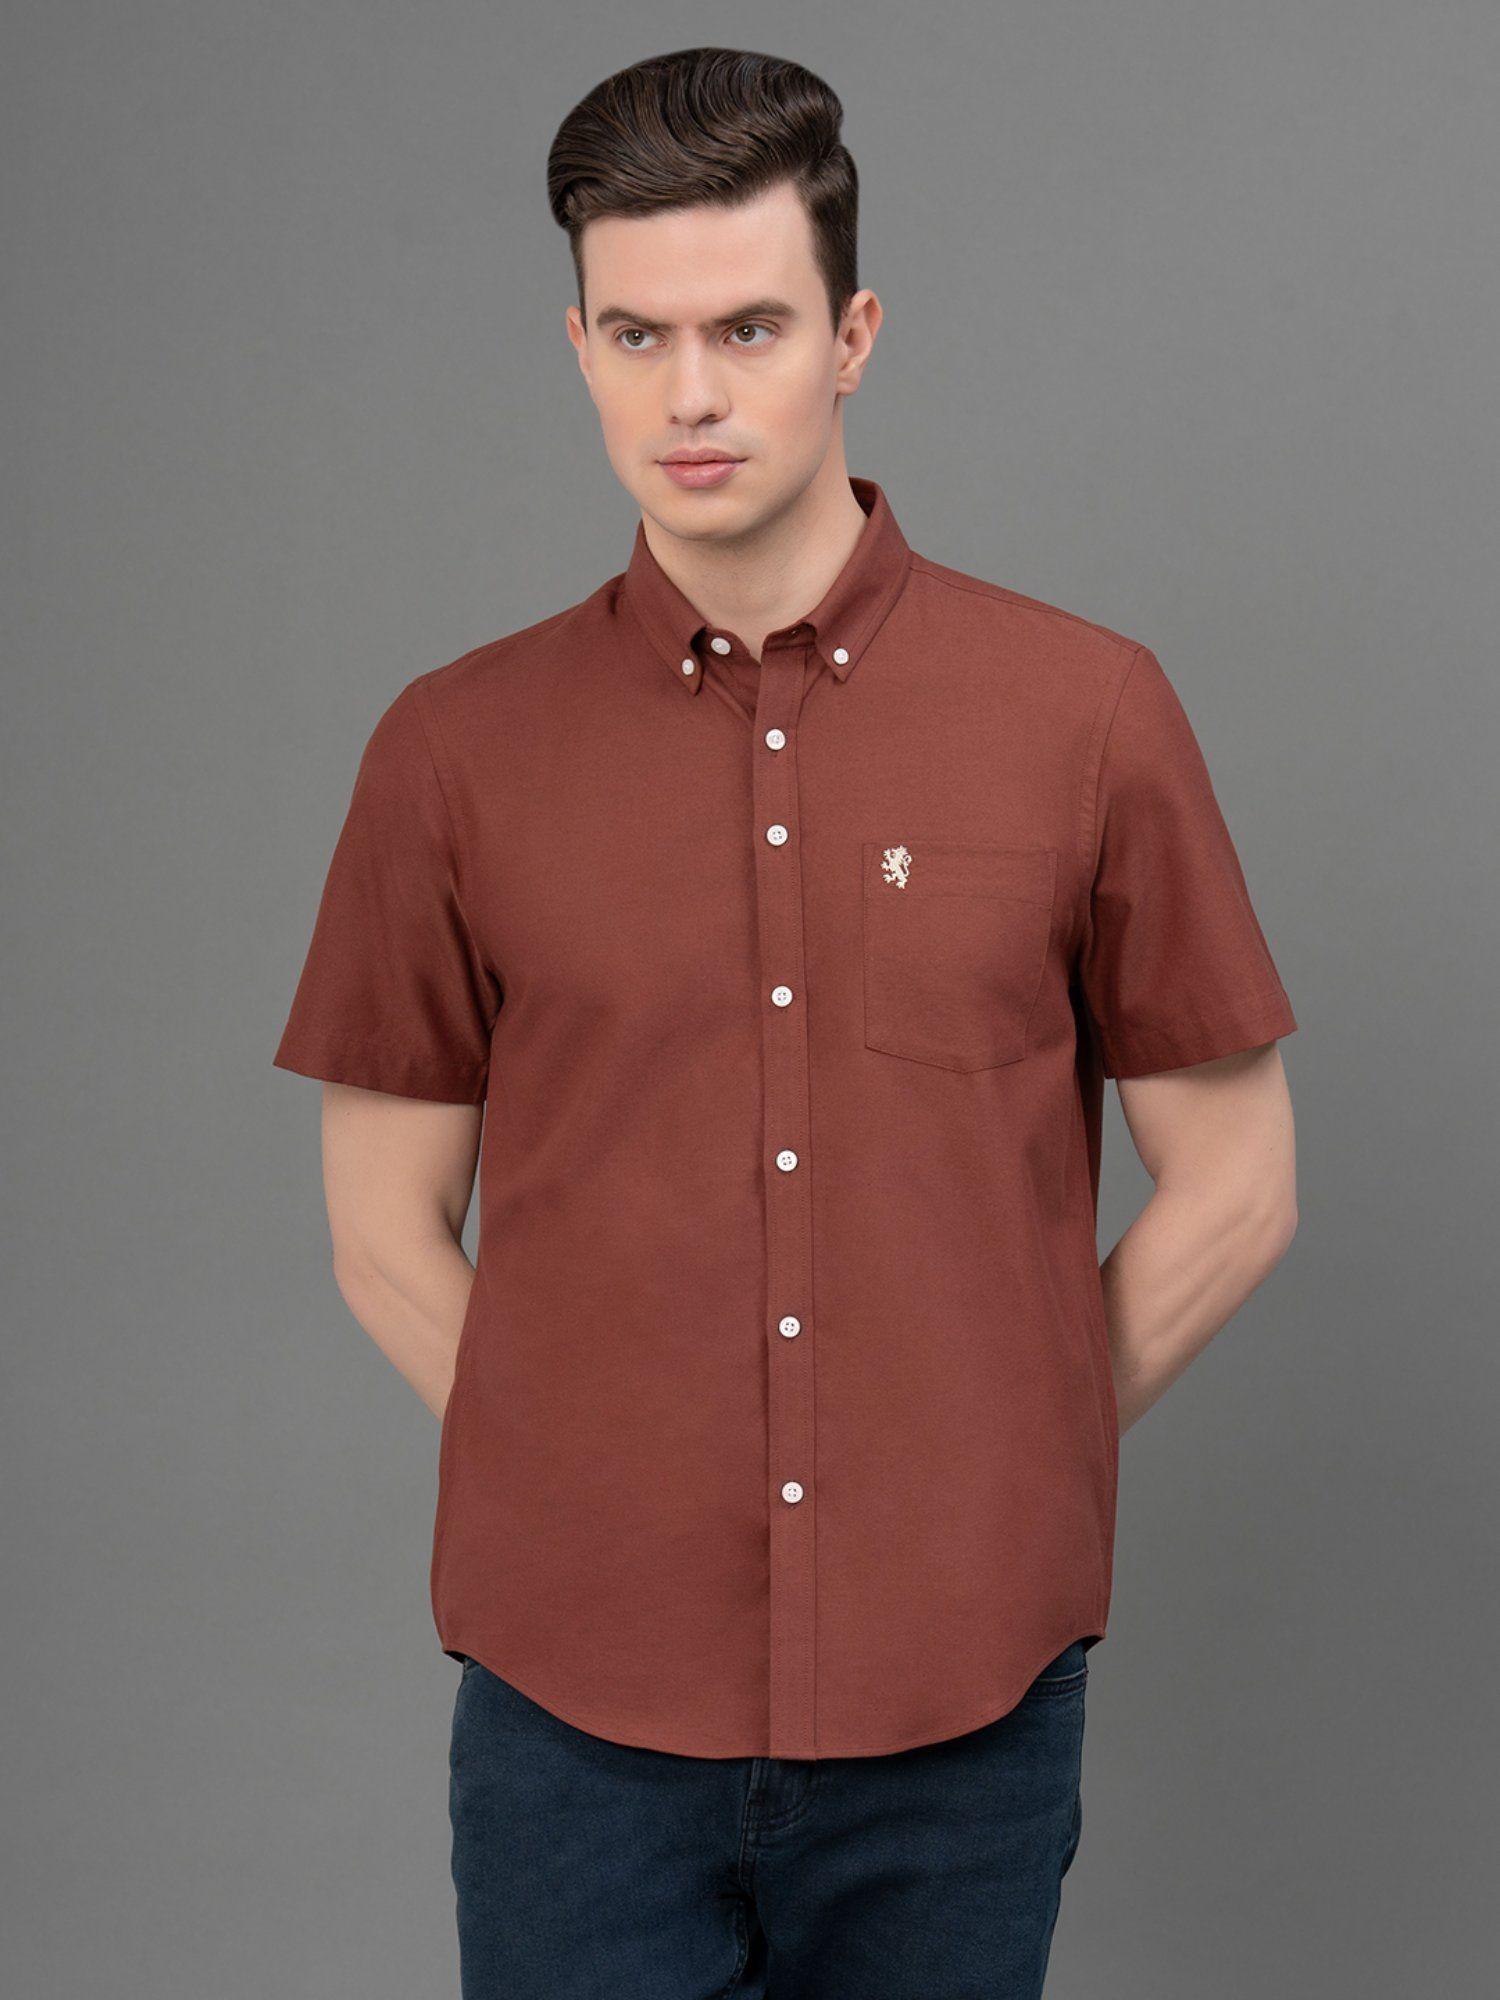 Men's Rust Solid Pure Cotton Oxford Shirt